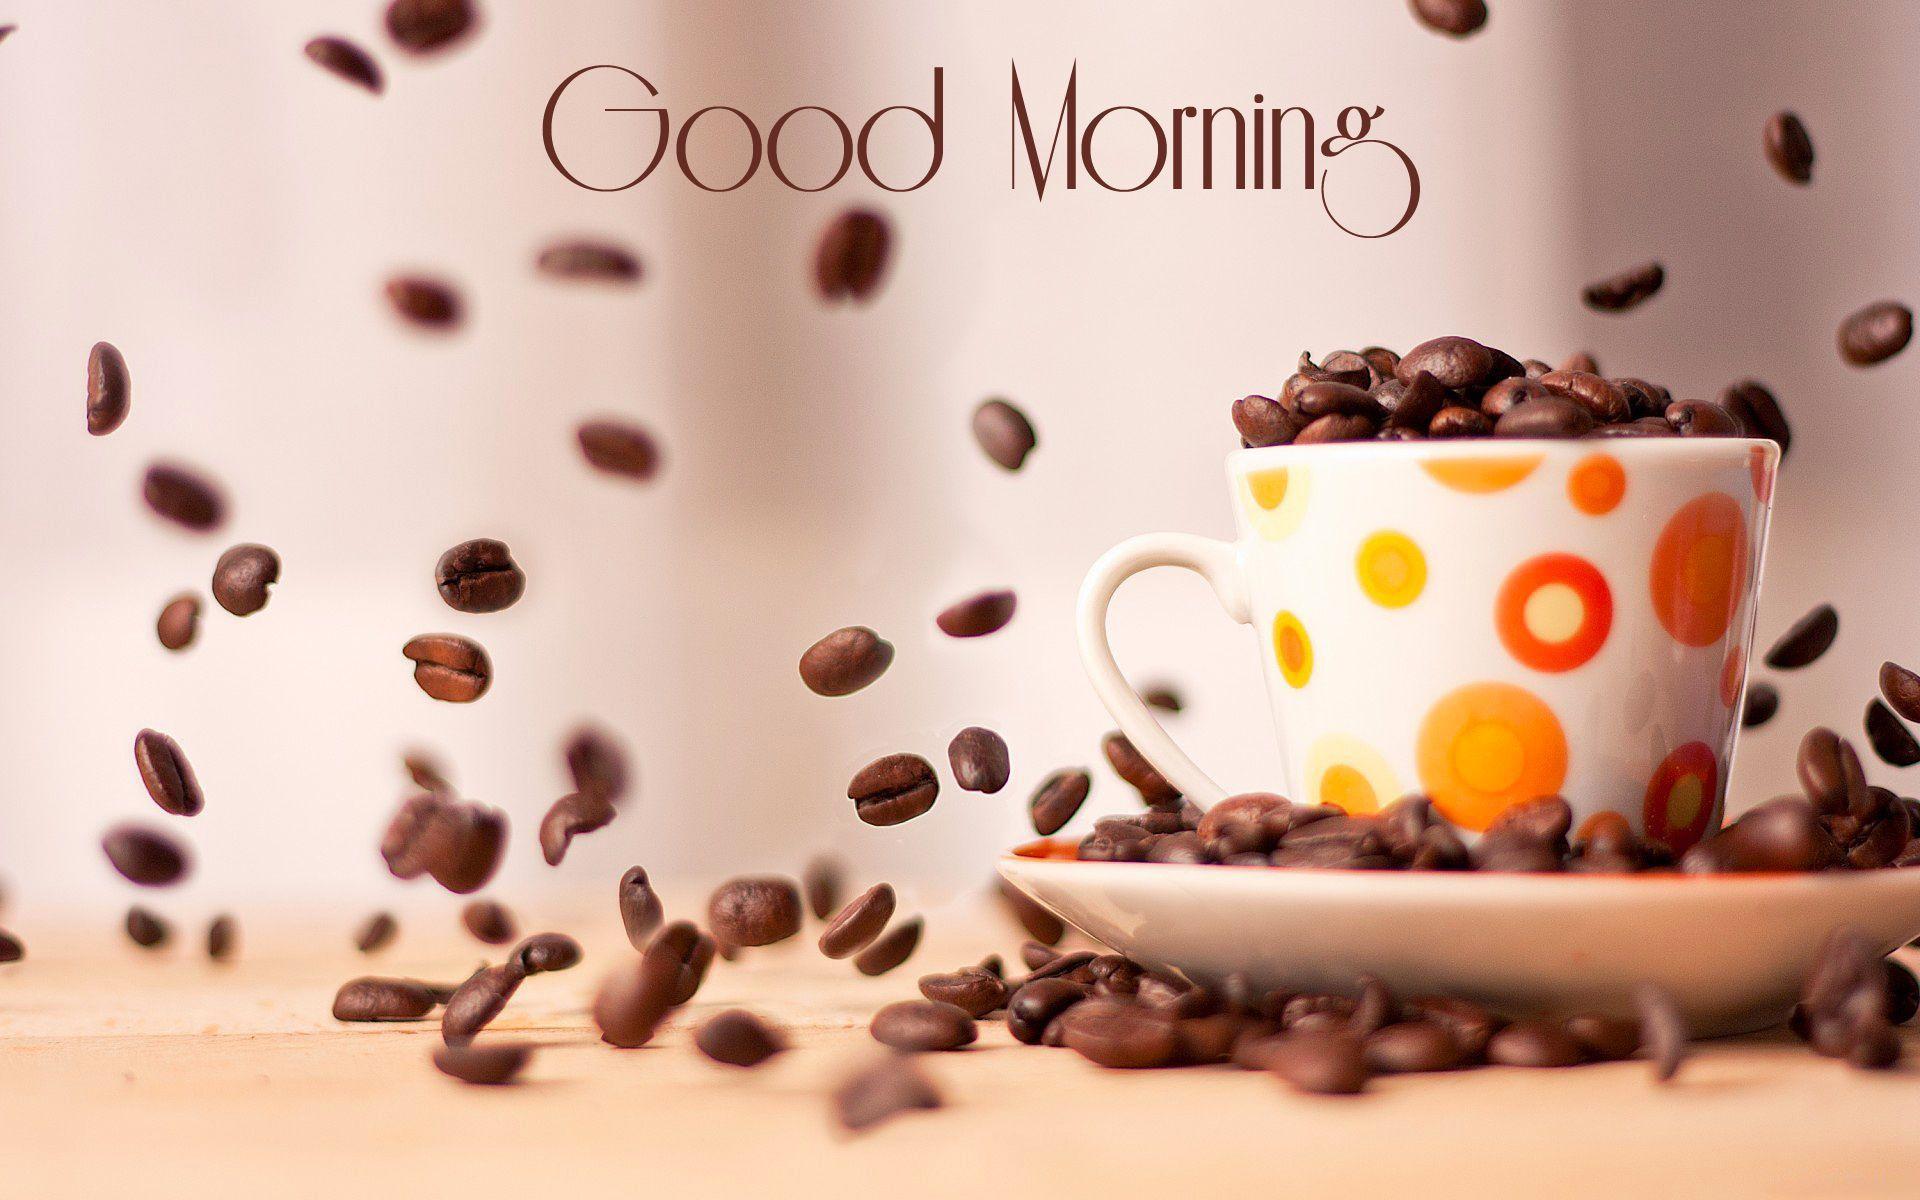 Good Morning Wallpaper Picture Image